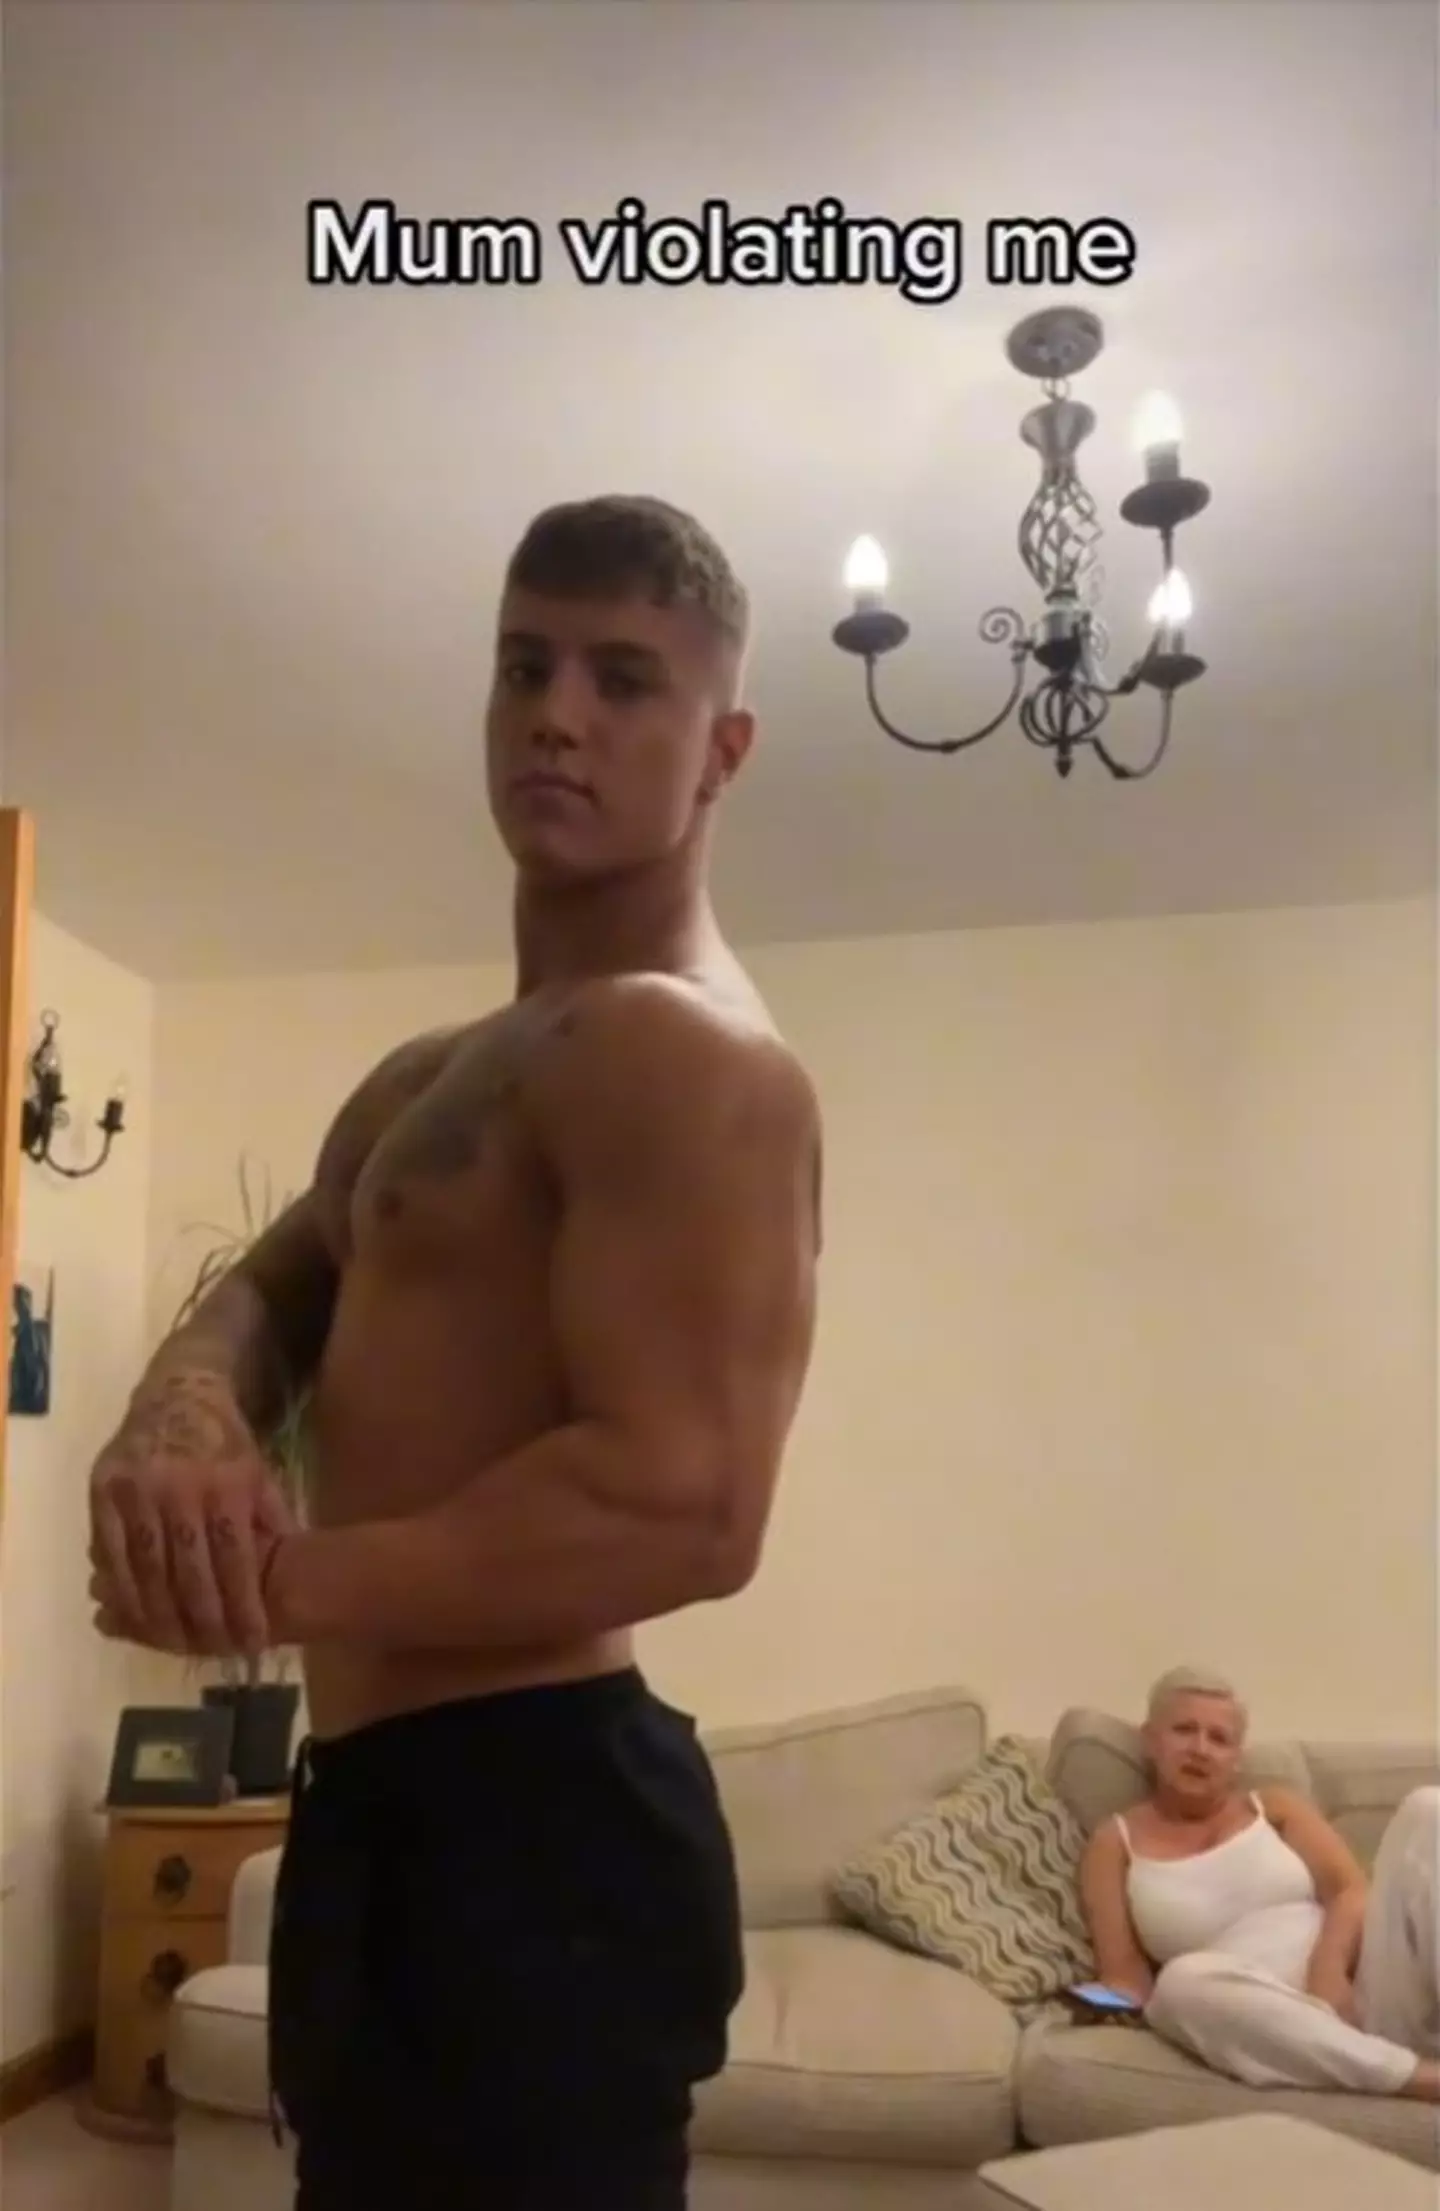 TikTok users have loved his mum's reaction.